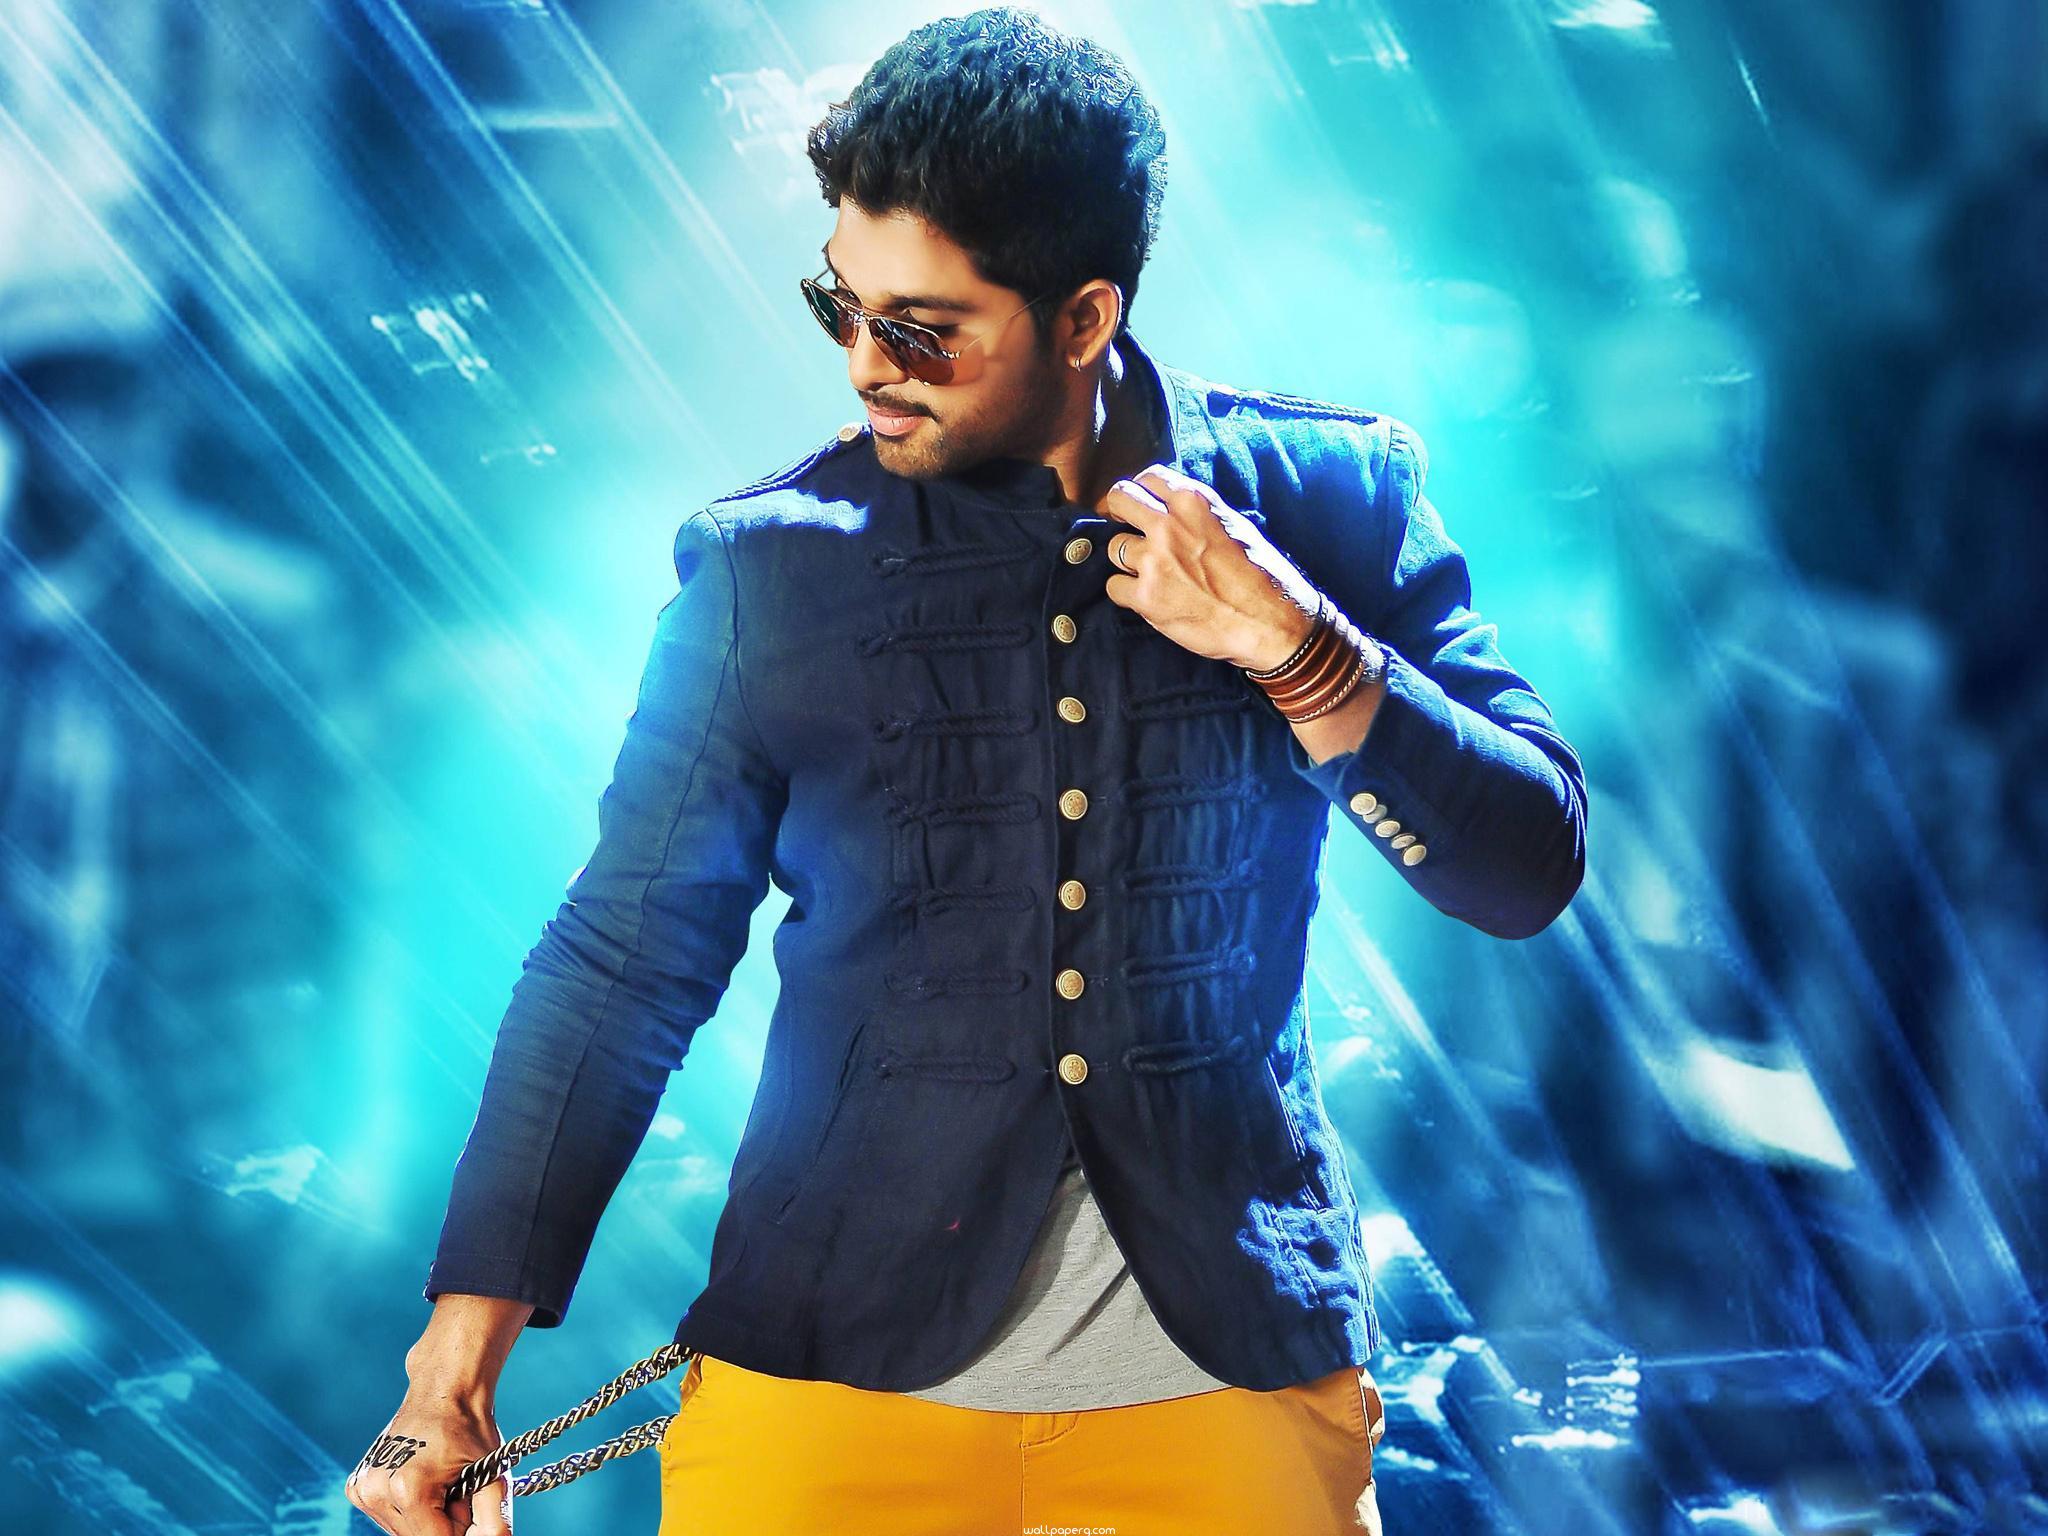 Download Allu Arjun Stylish Hd Wallpaper For Mobile Laptop Cool Actor Images For Your Mobile Cell Phone